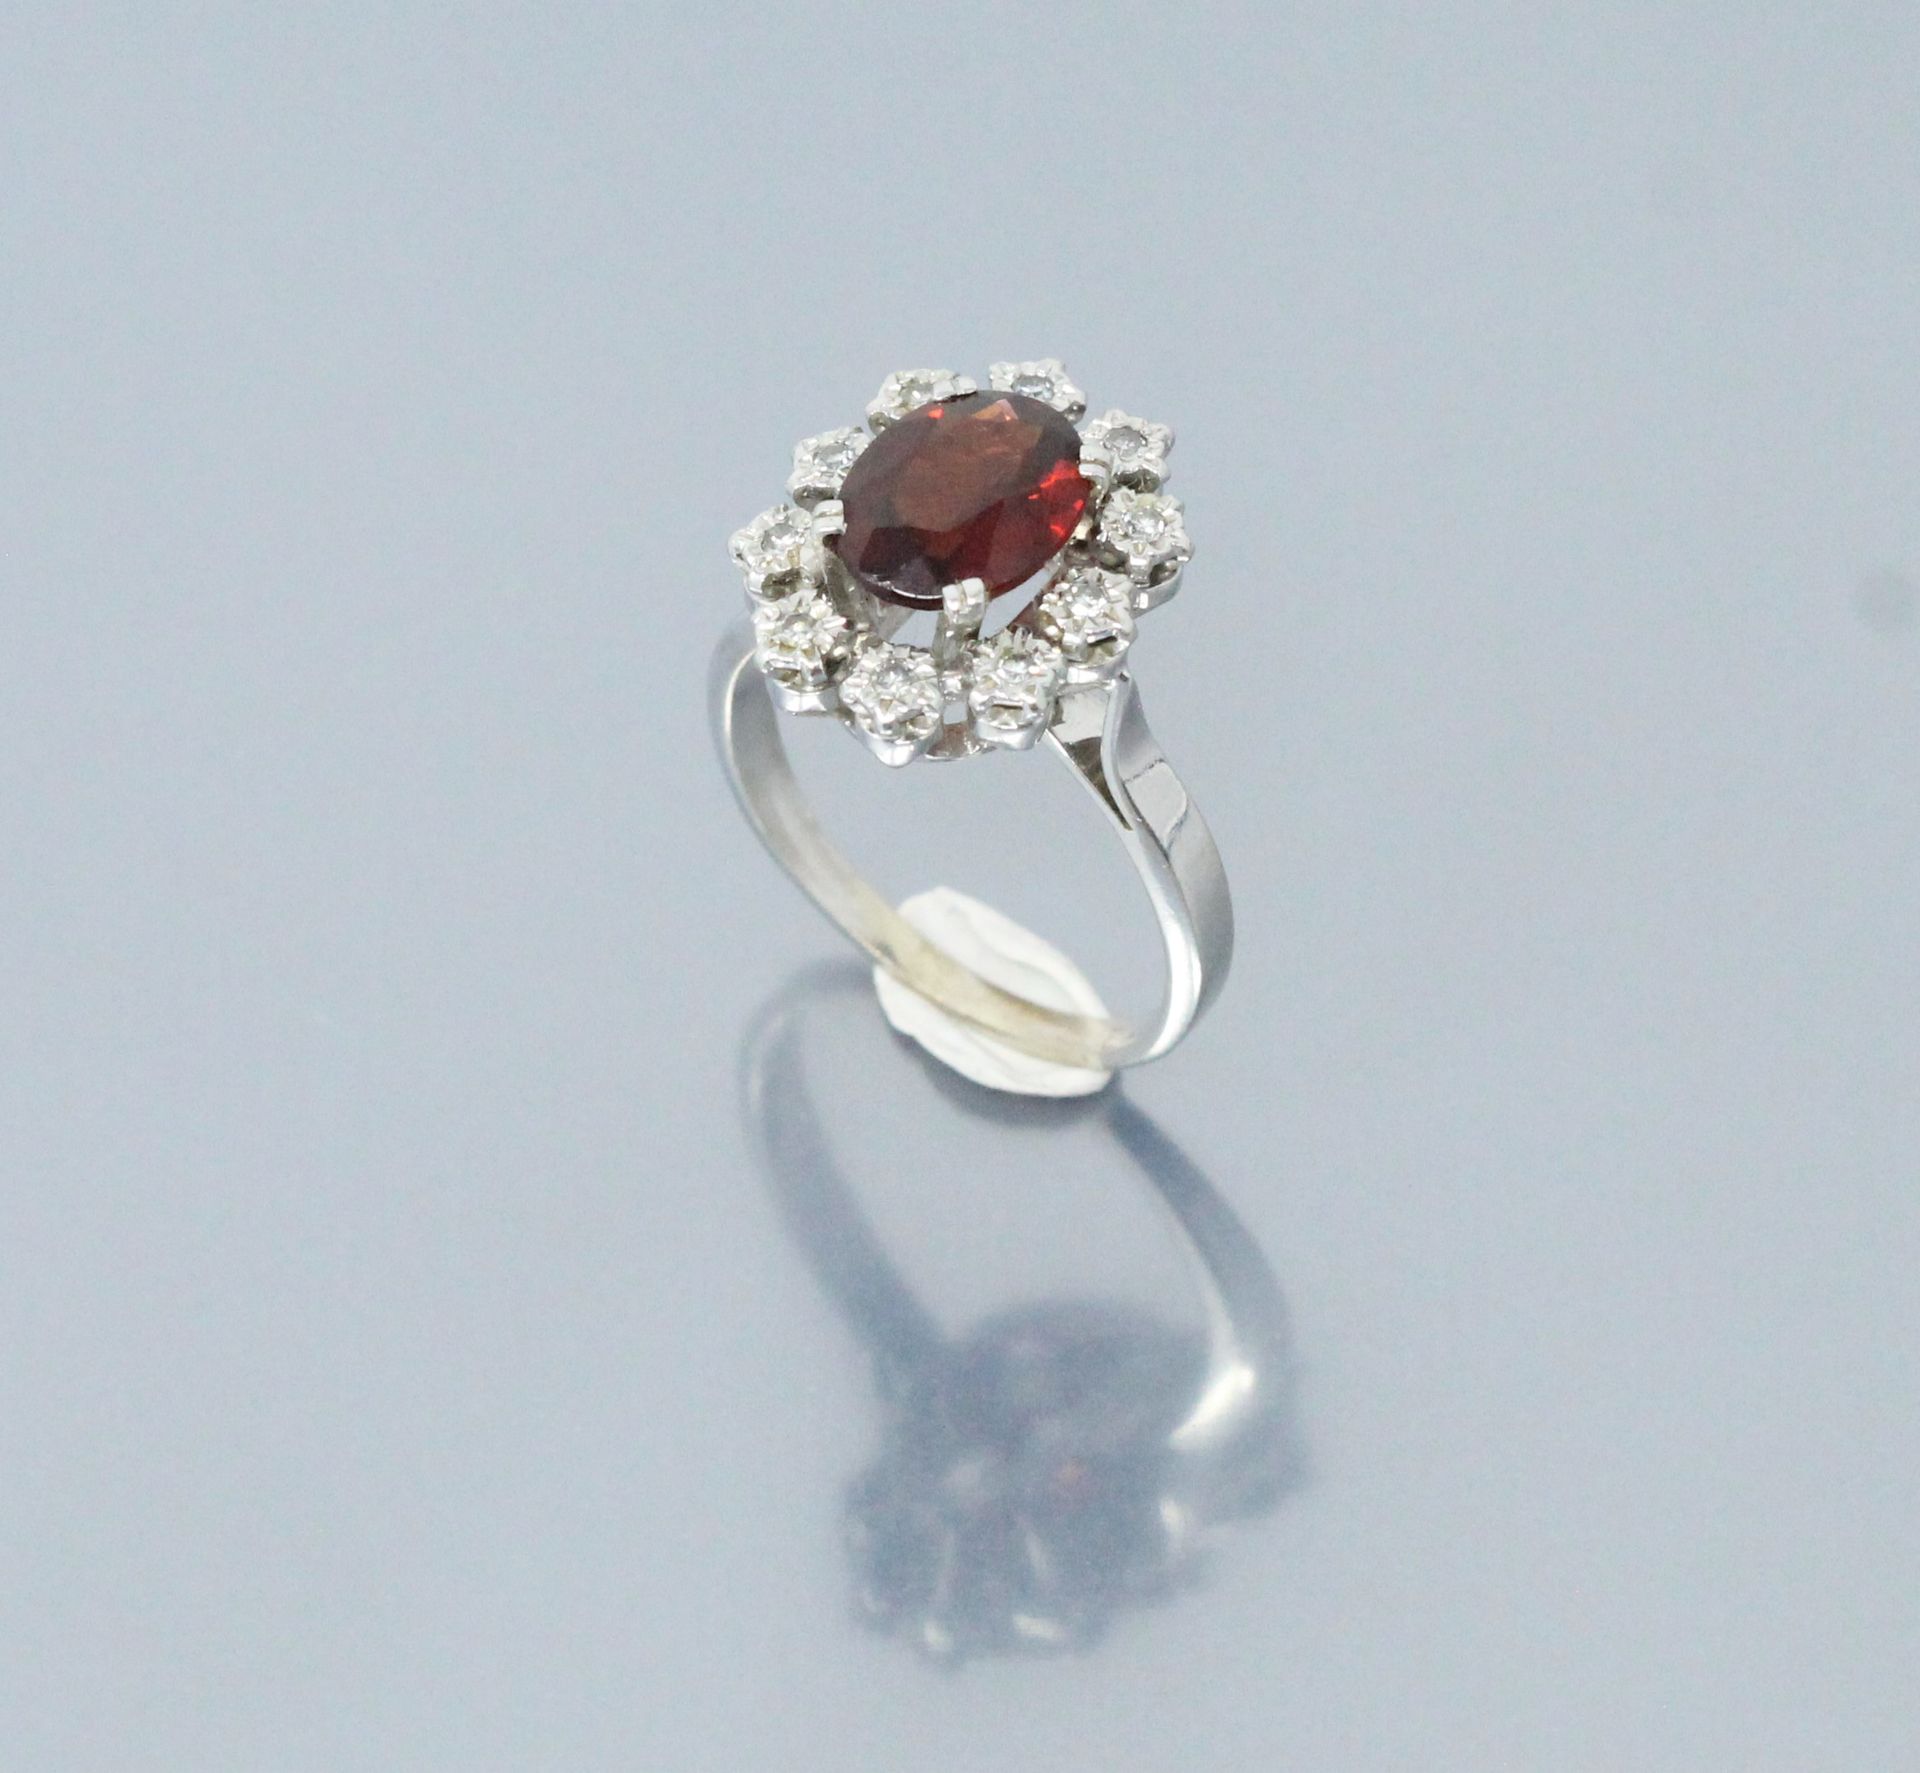 Null 18k (750) white gold ring set with an oval garnet in a diamond setting. 

H&hellip;